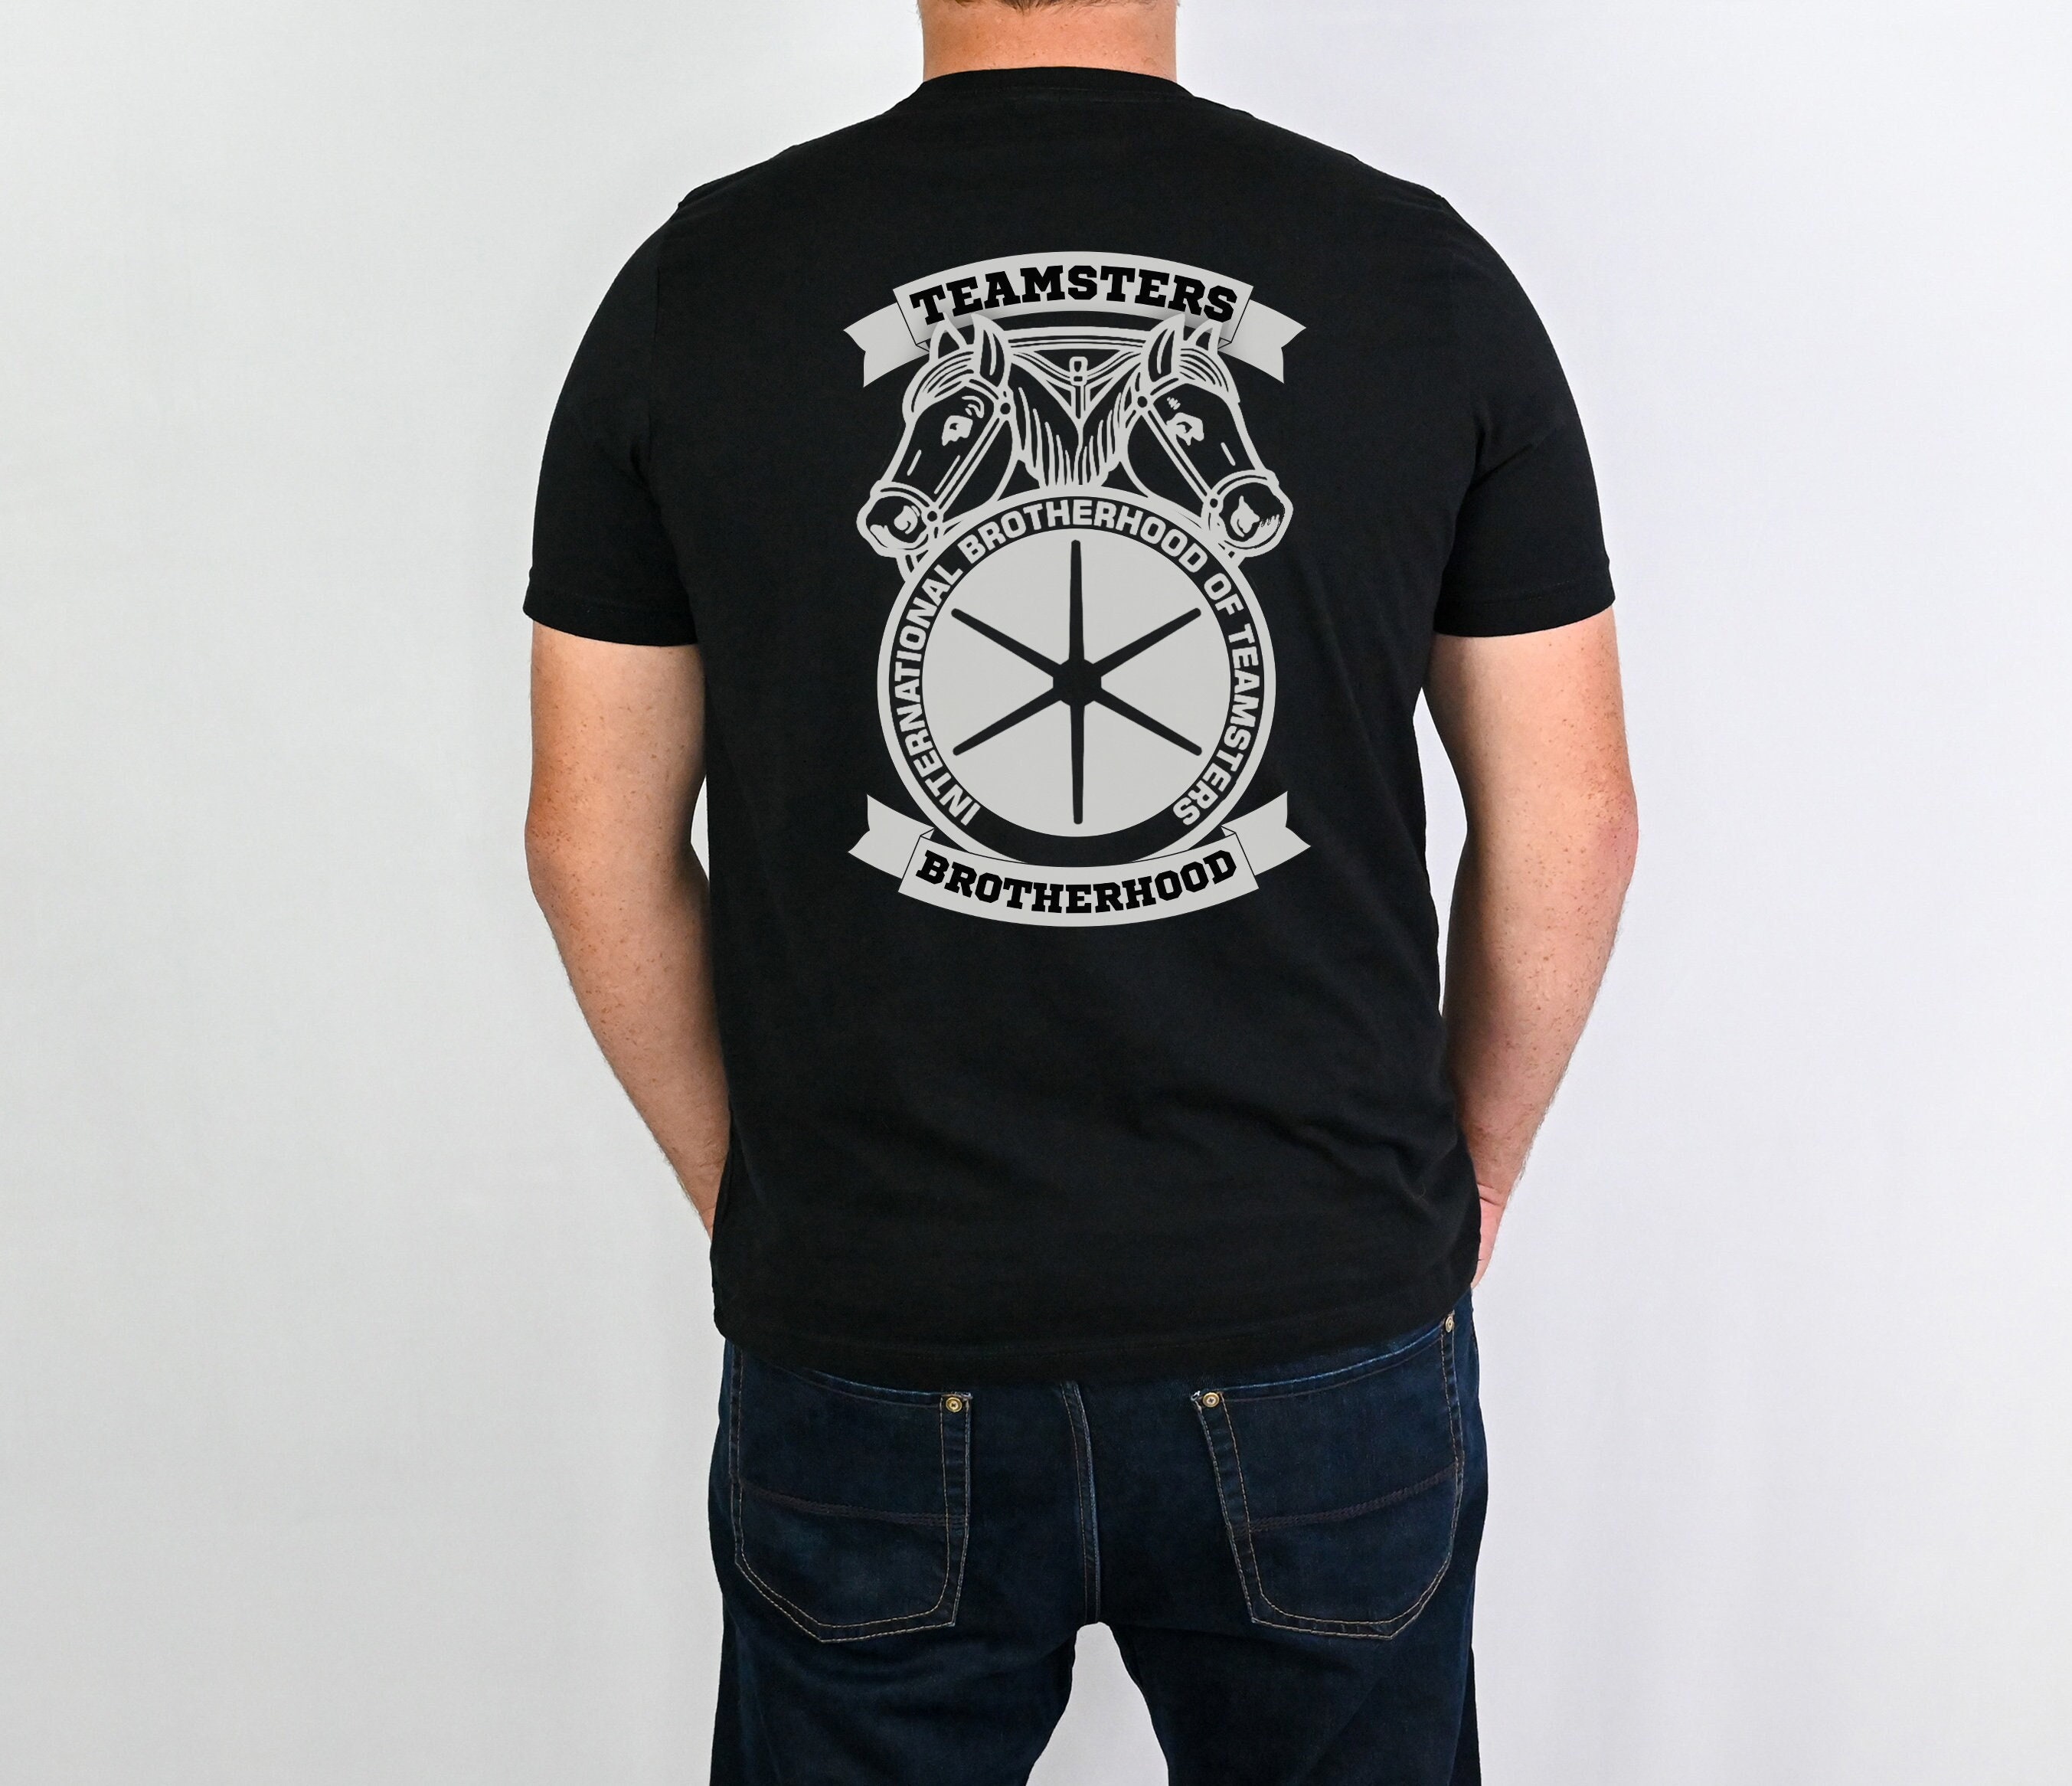 Teamsters Union Shirt for Teamsters Member Tshirt Gift for Teamsters ...